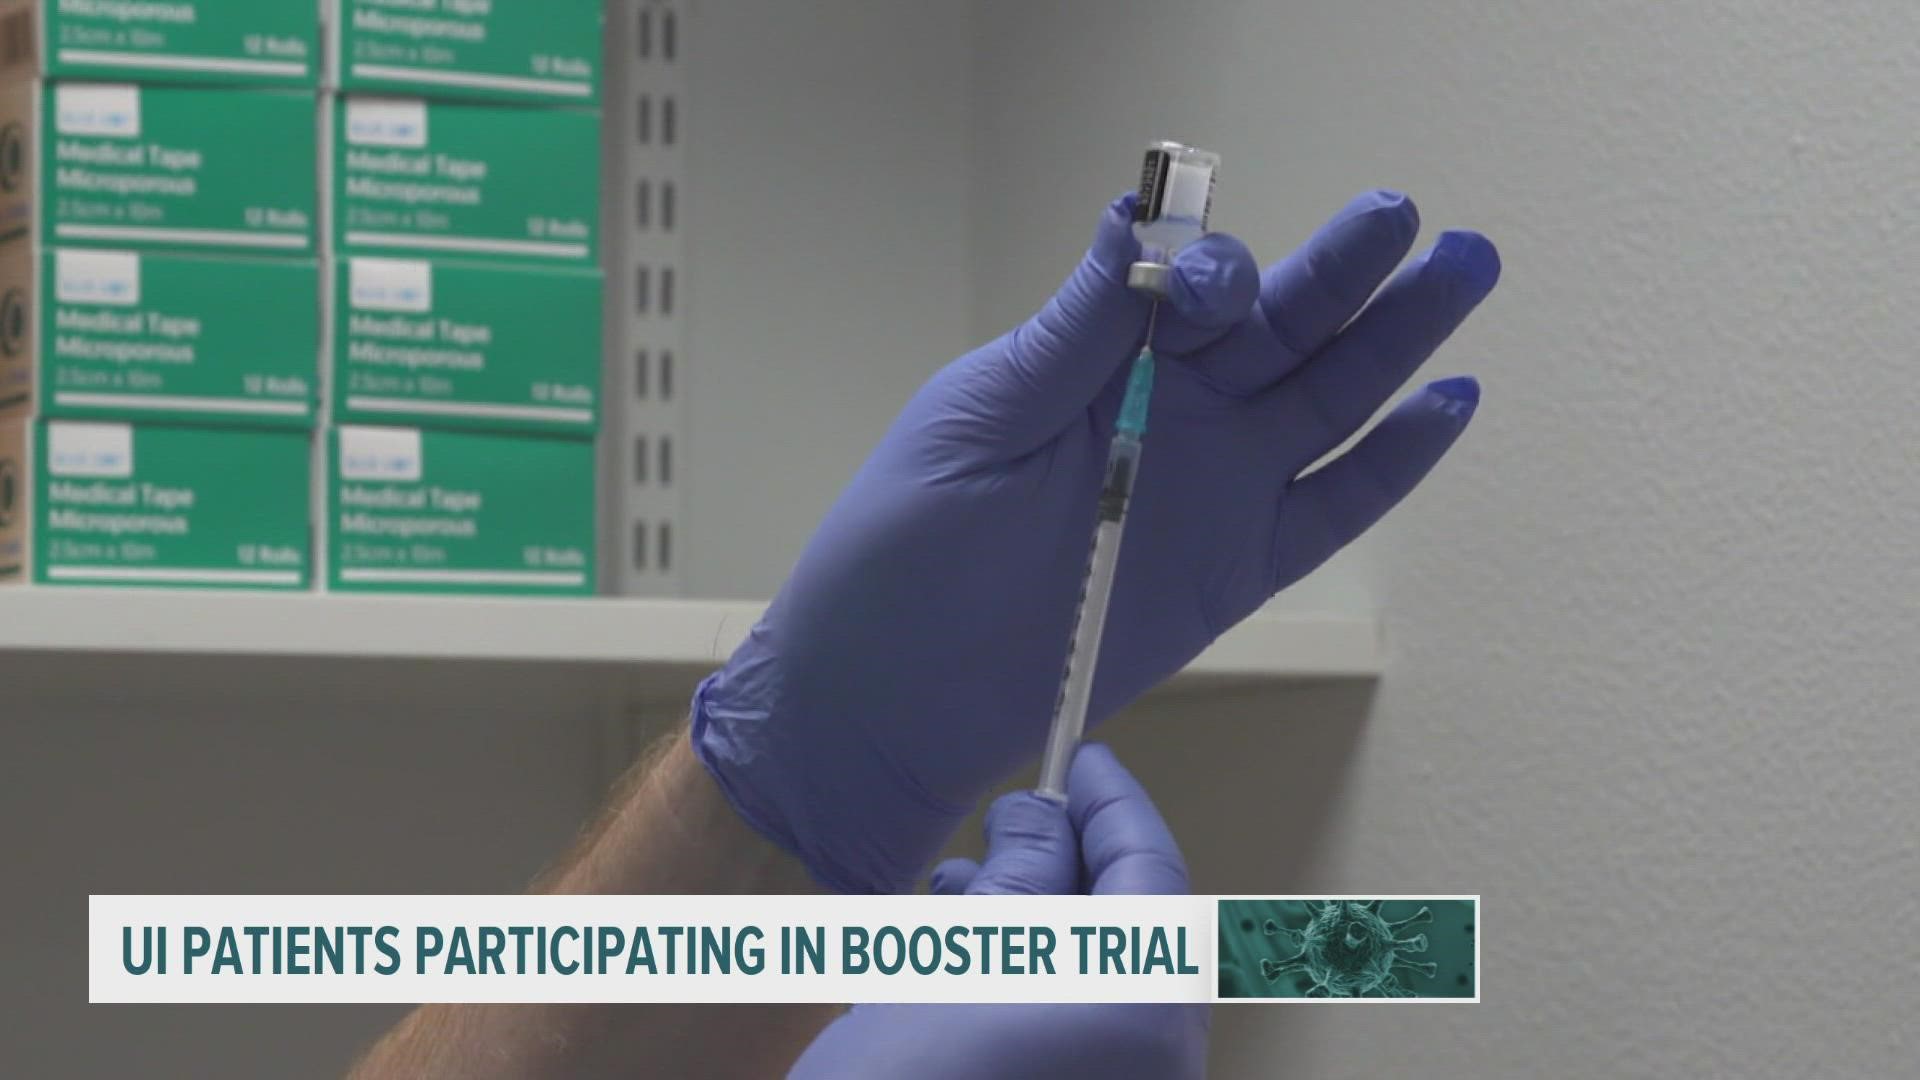 A year ago Iowans began participating in Pfizer's COVID vaccine trials for the first emergency authorization. Now, they're helping test boosters—and a new vaccine.